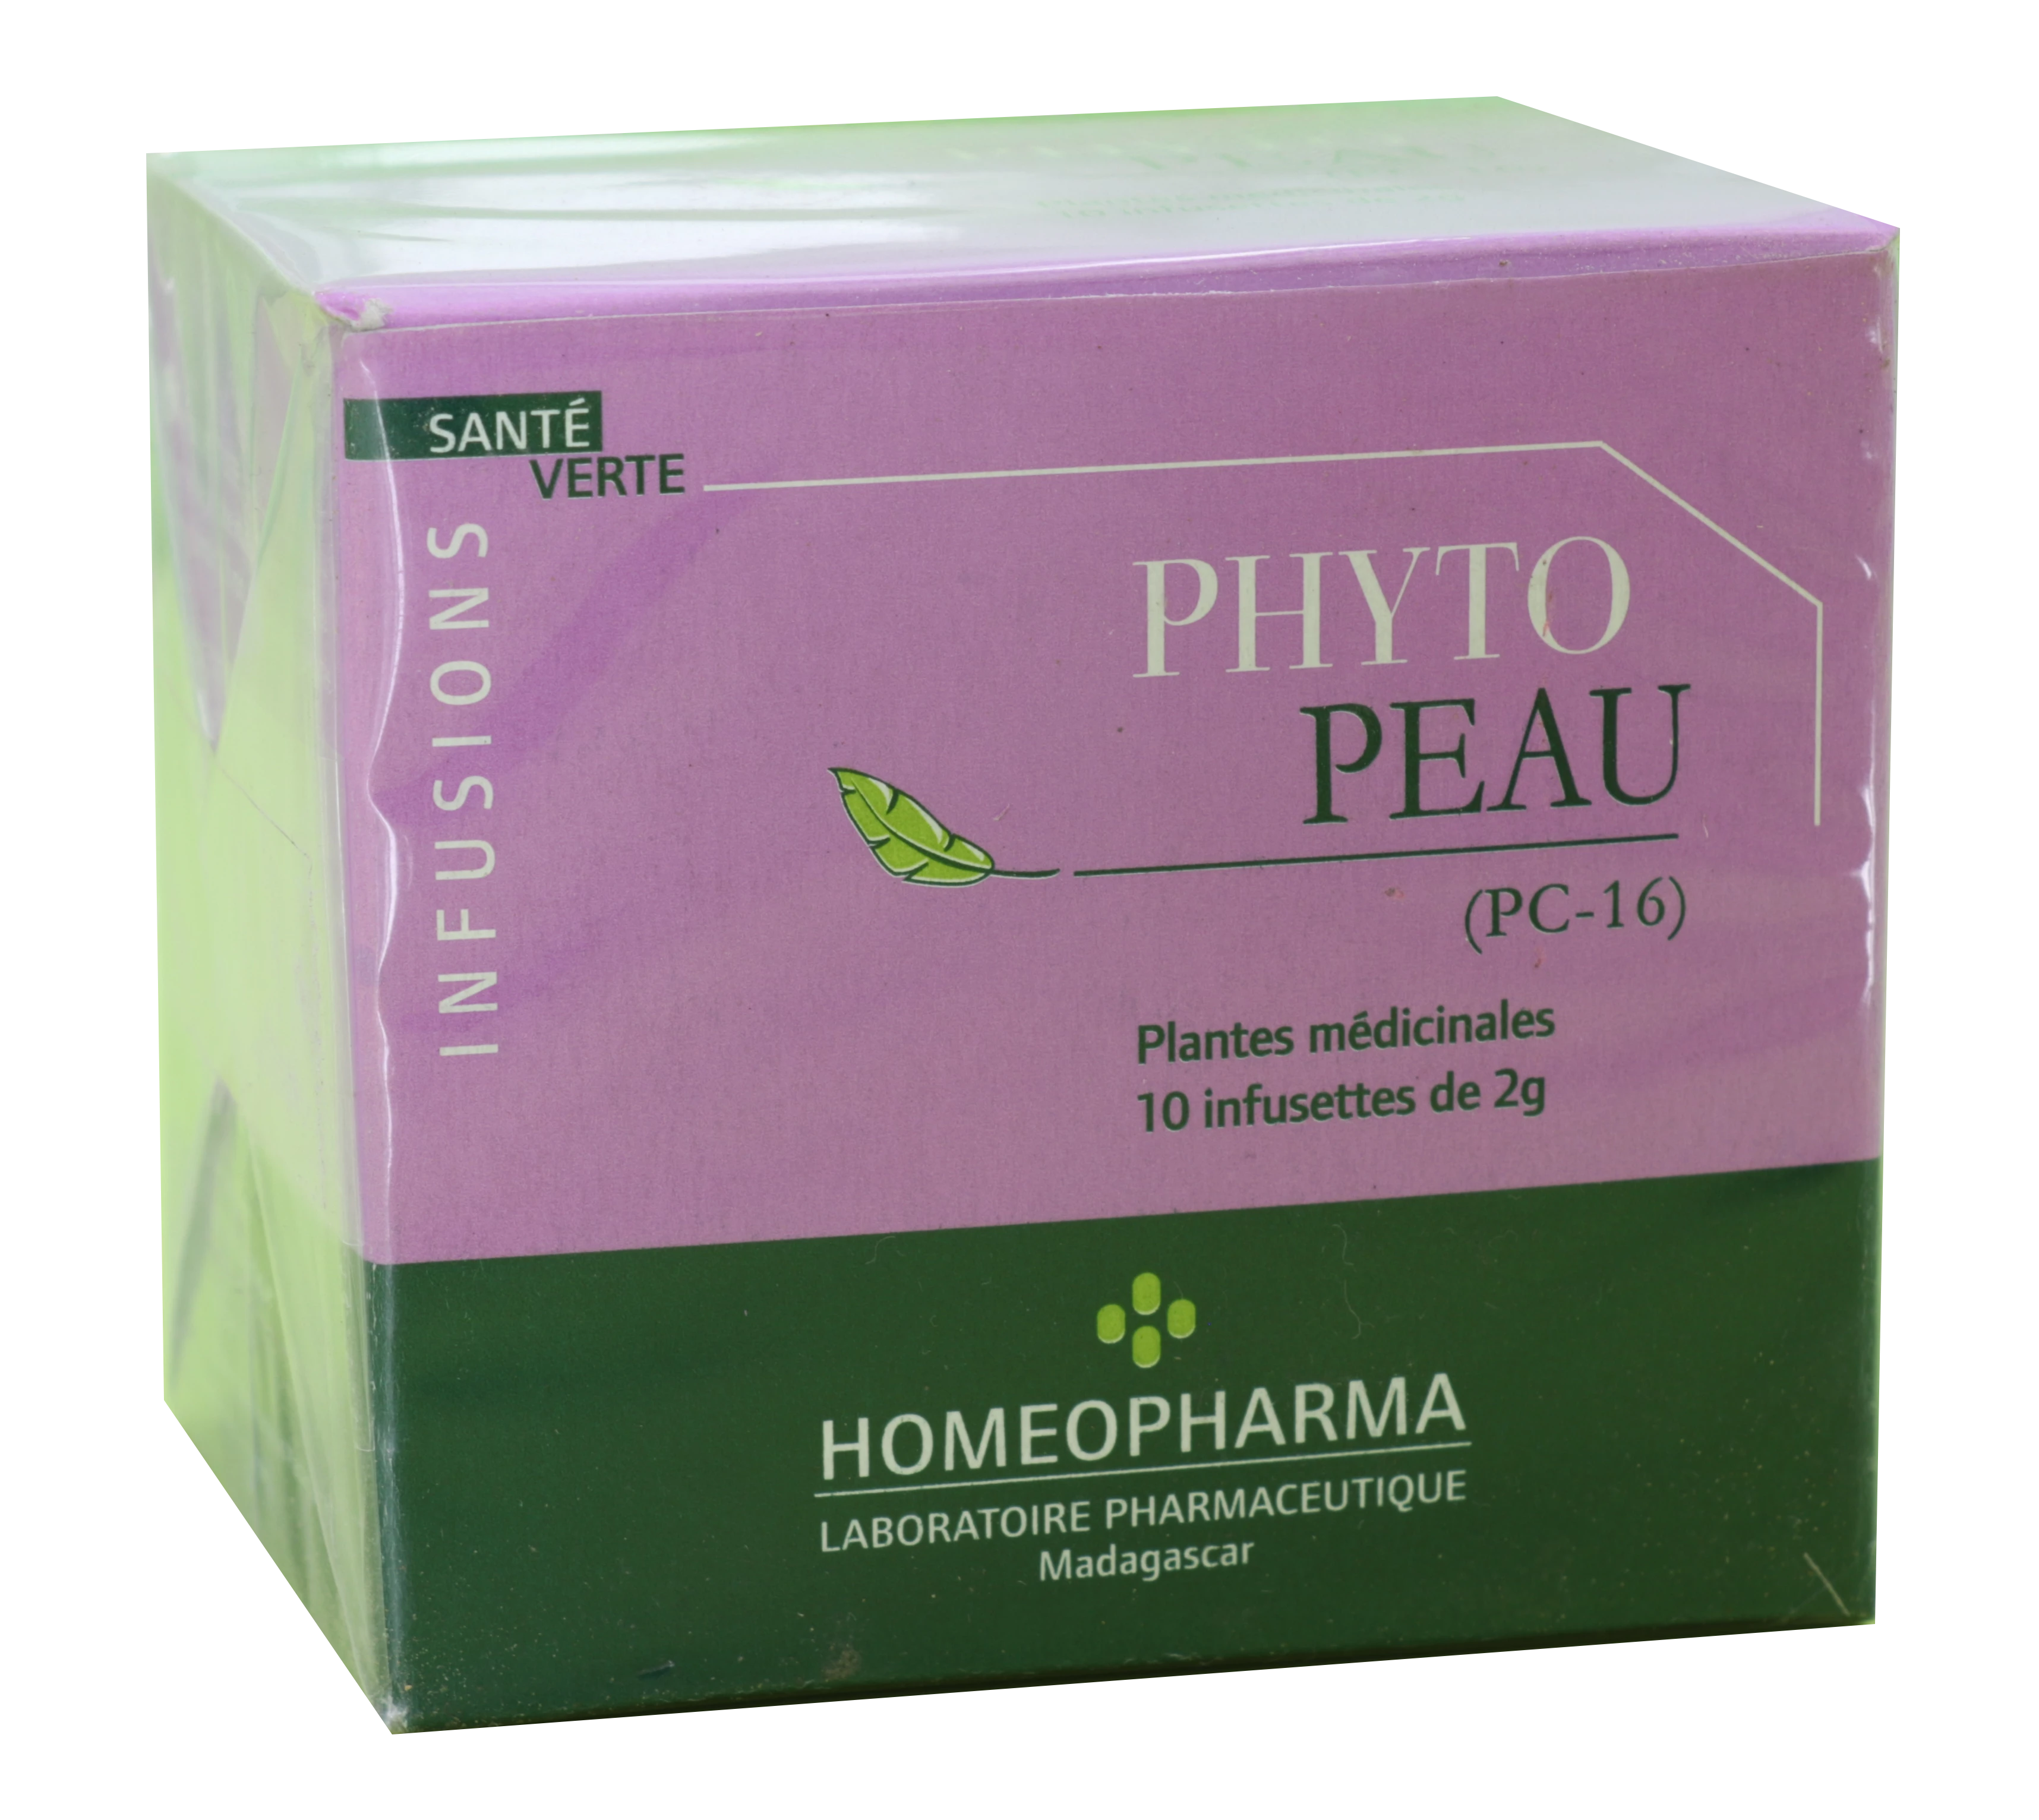 Traditional Phytotherapie Pc16-phyto-peau Box 20 Infusettes - HOMEOPHARMA